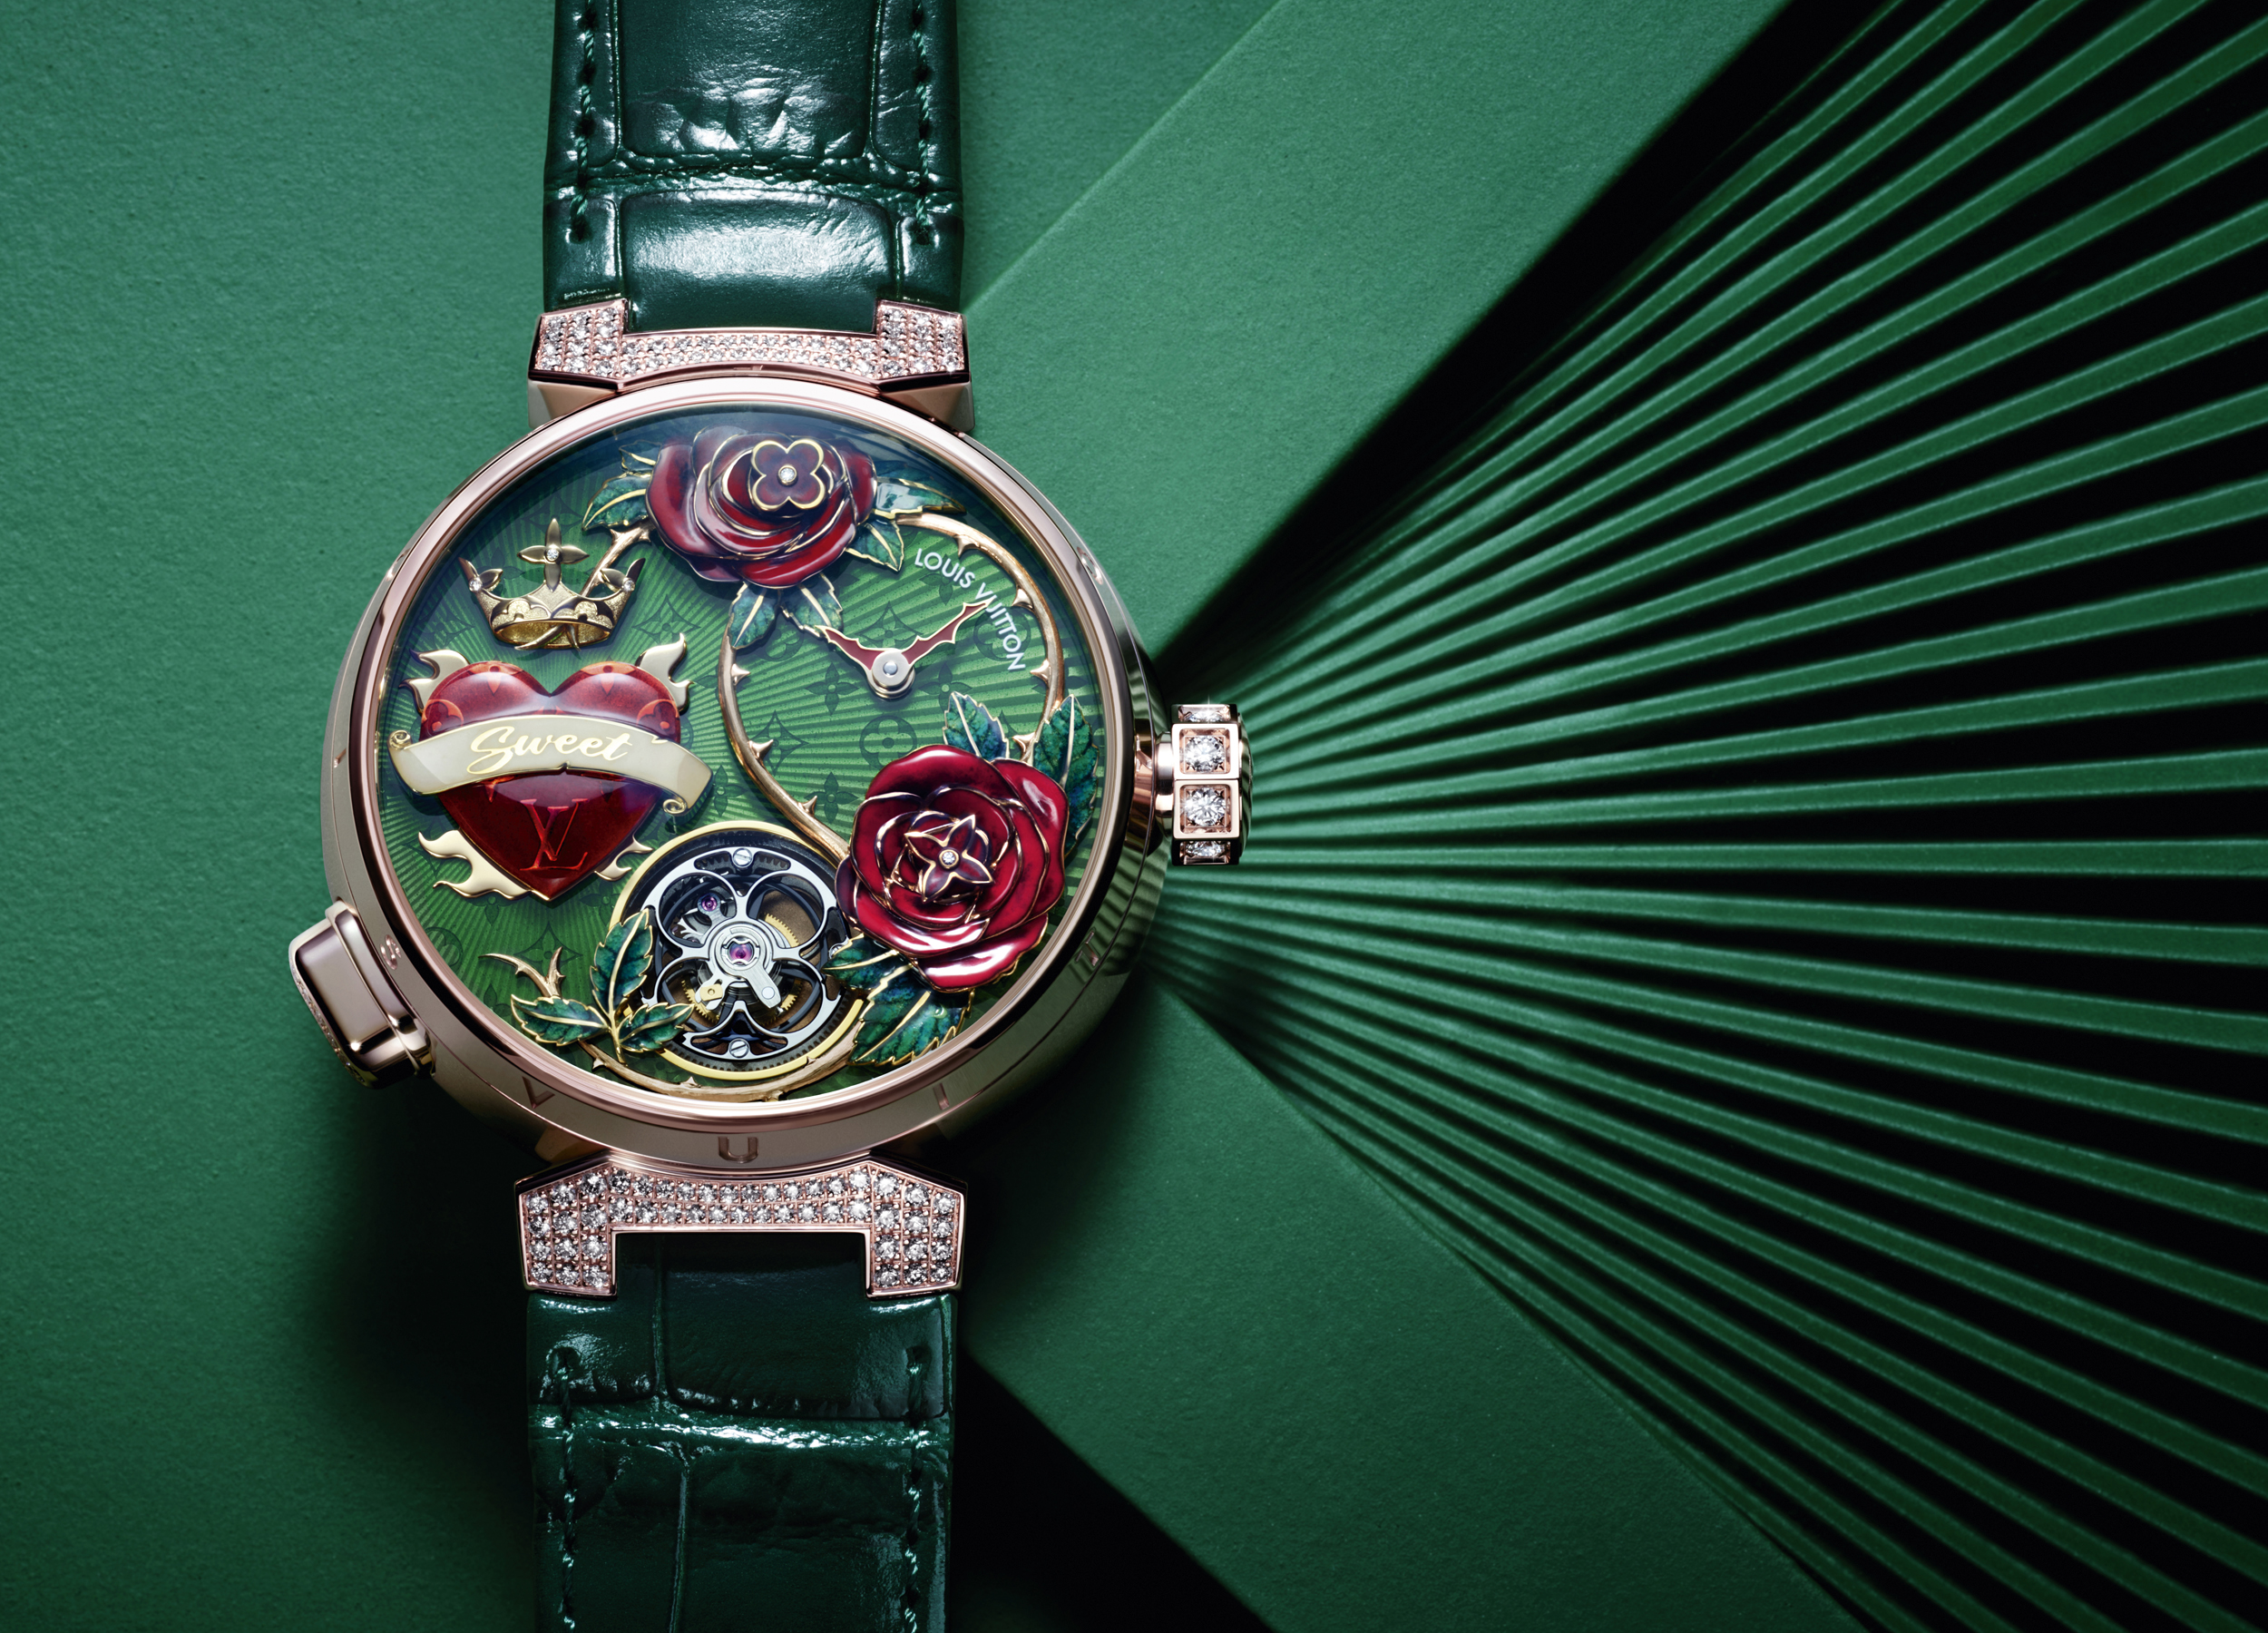 This limited edition Louis Vuitton Tambour watch comes in a